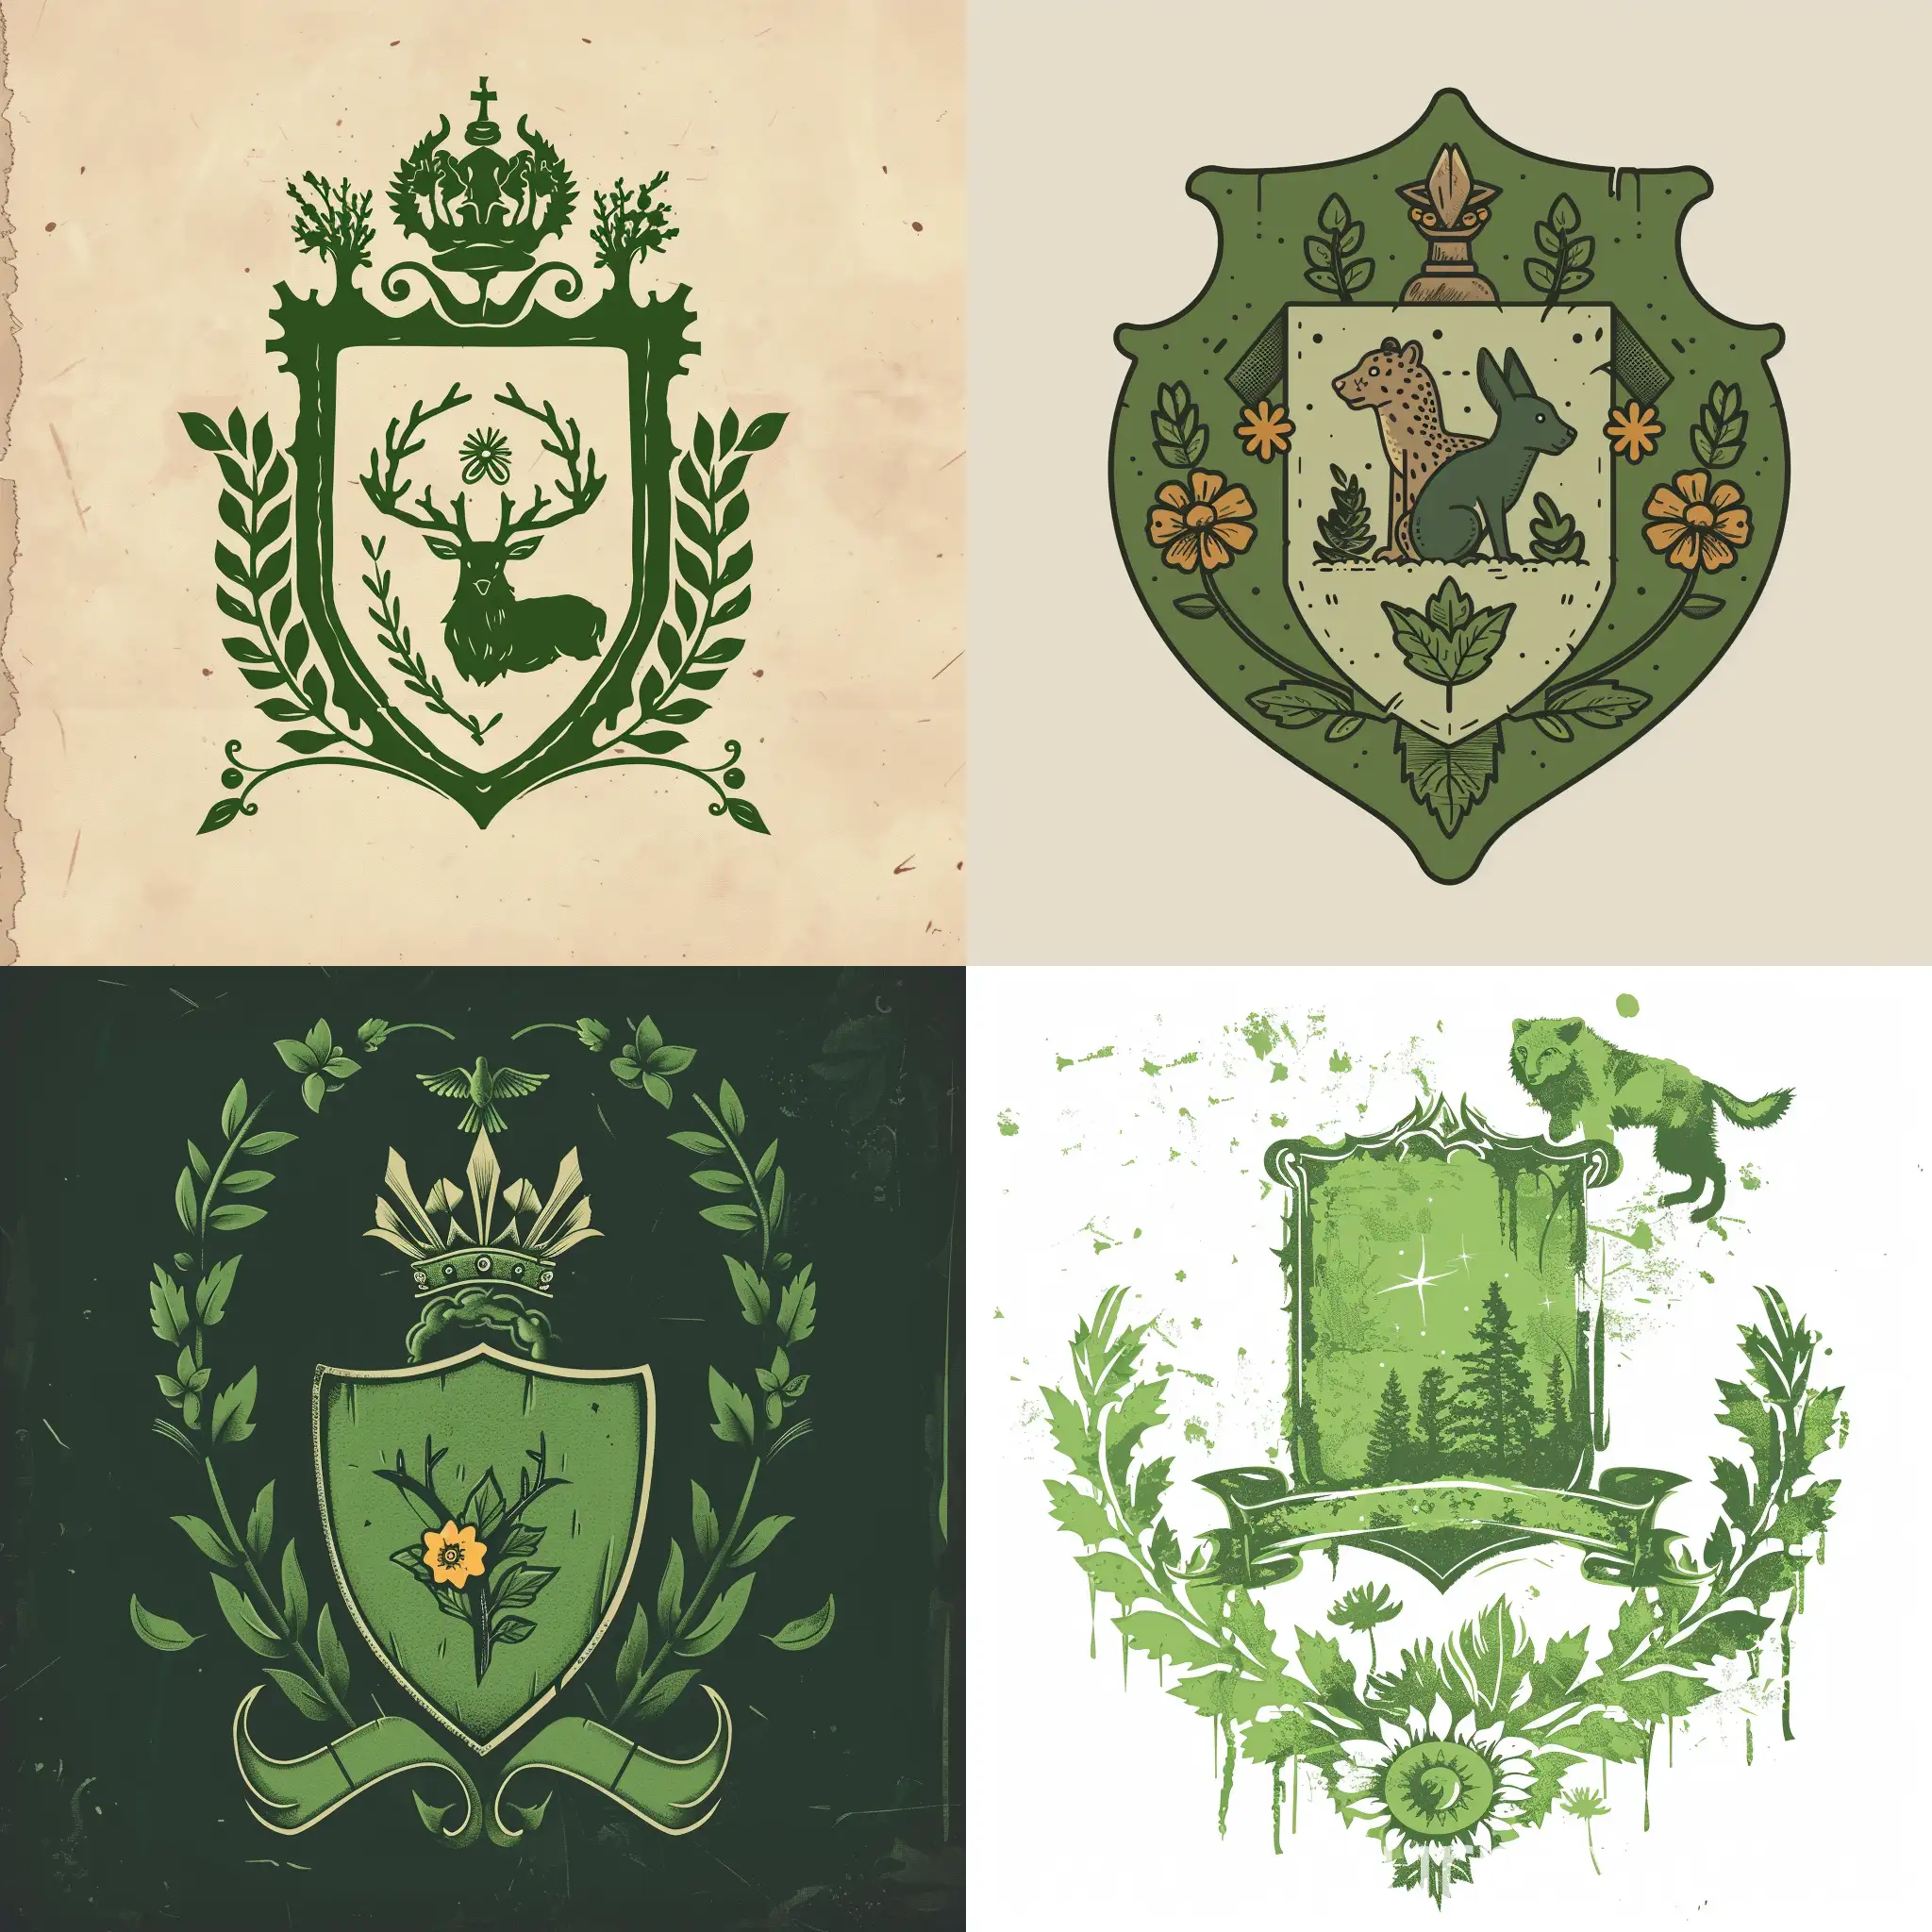 draw a crest. minimalistic. with forest animal. green. a flower on it